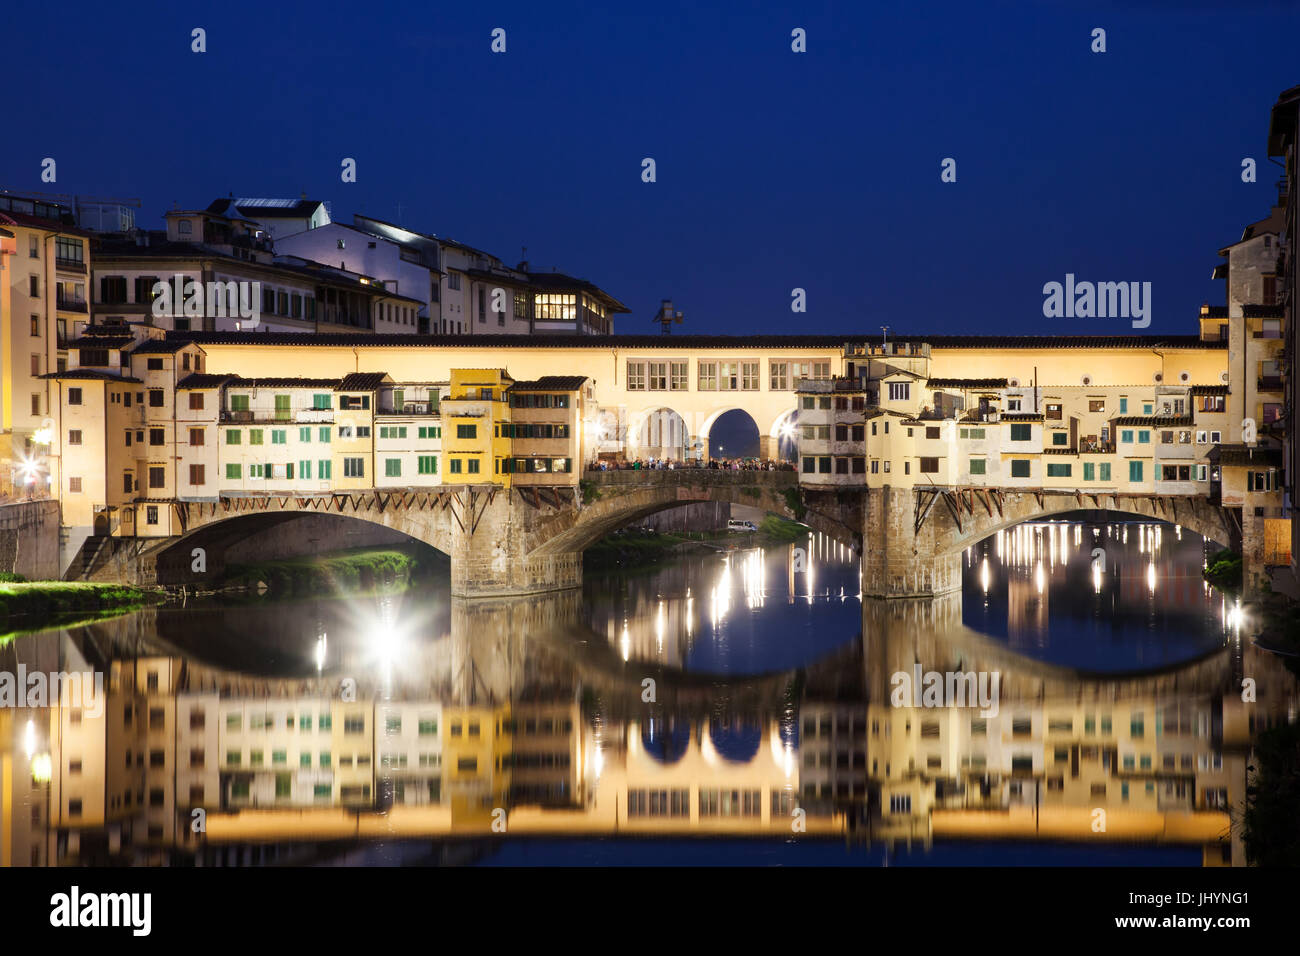 Ponte Vecchio at night reflecting in River Arno, Florence, UNESCO World Heritage Site, Tuscany, Italy, Europe Stock Photo